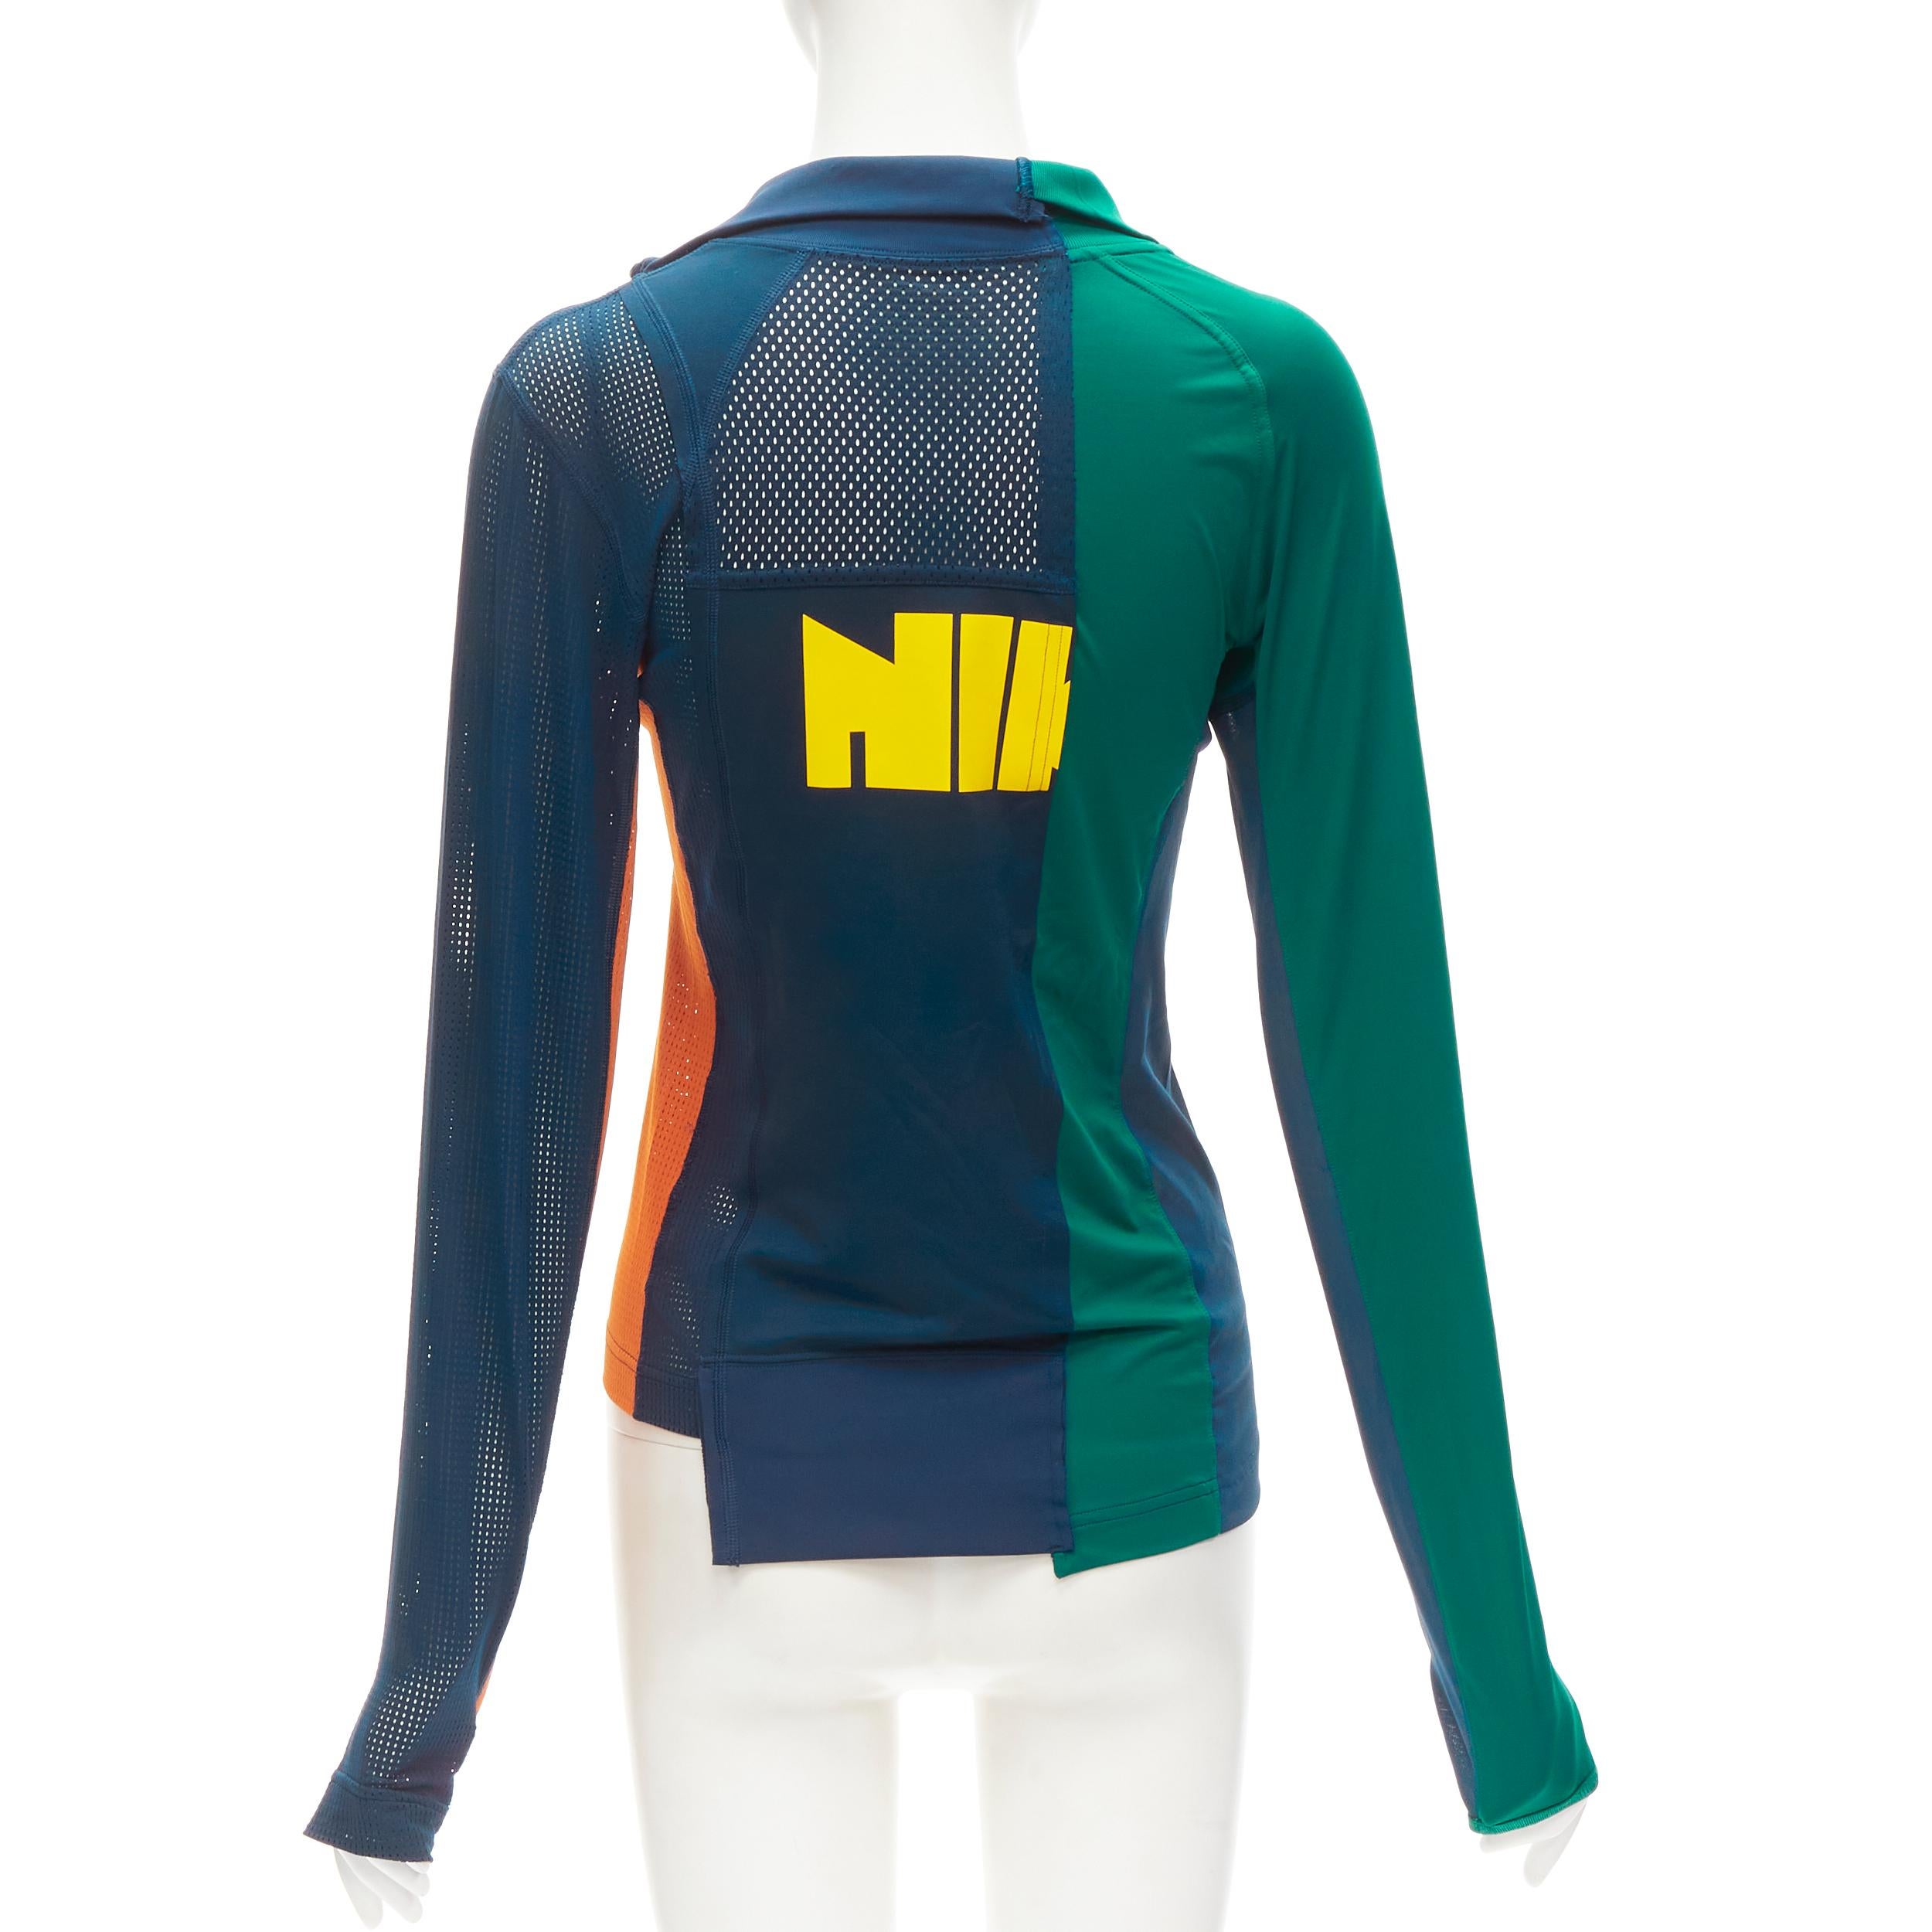 SACAI NIKE Athletics West patchwork football perforated half zip top XXS
Brand: Sacai
Designer: Chitose Abe
Material: Feels like polyester
Color: Blue
Closure: Zip
Extra Detail: Sacai Nike logo on zip pull. Thumbhole at sleeves.
Made in: